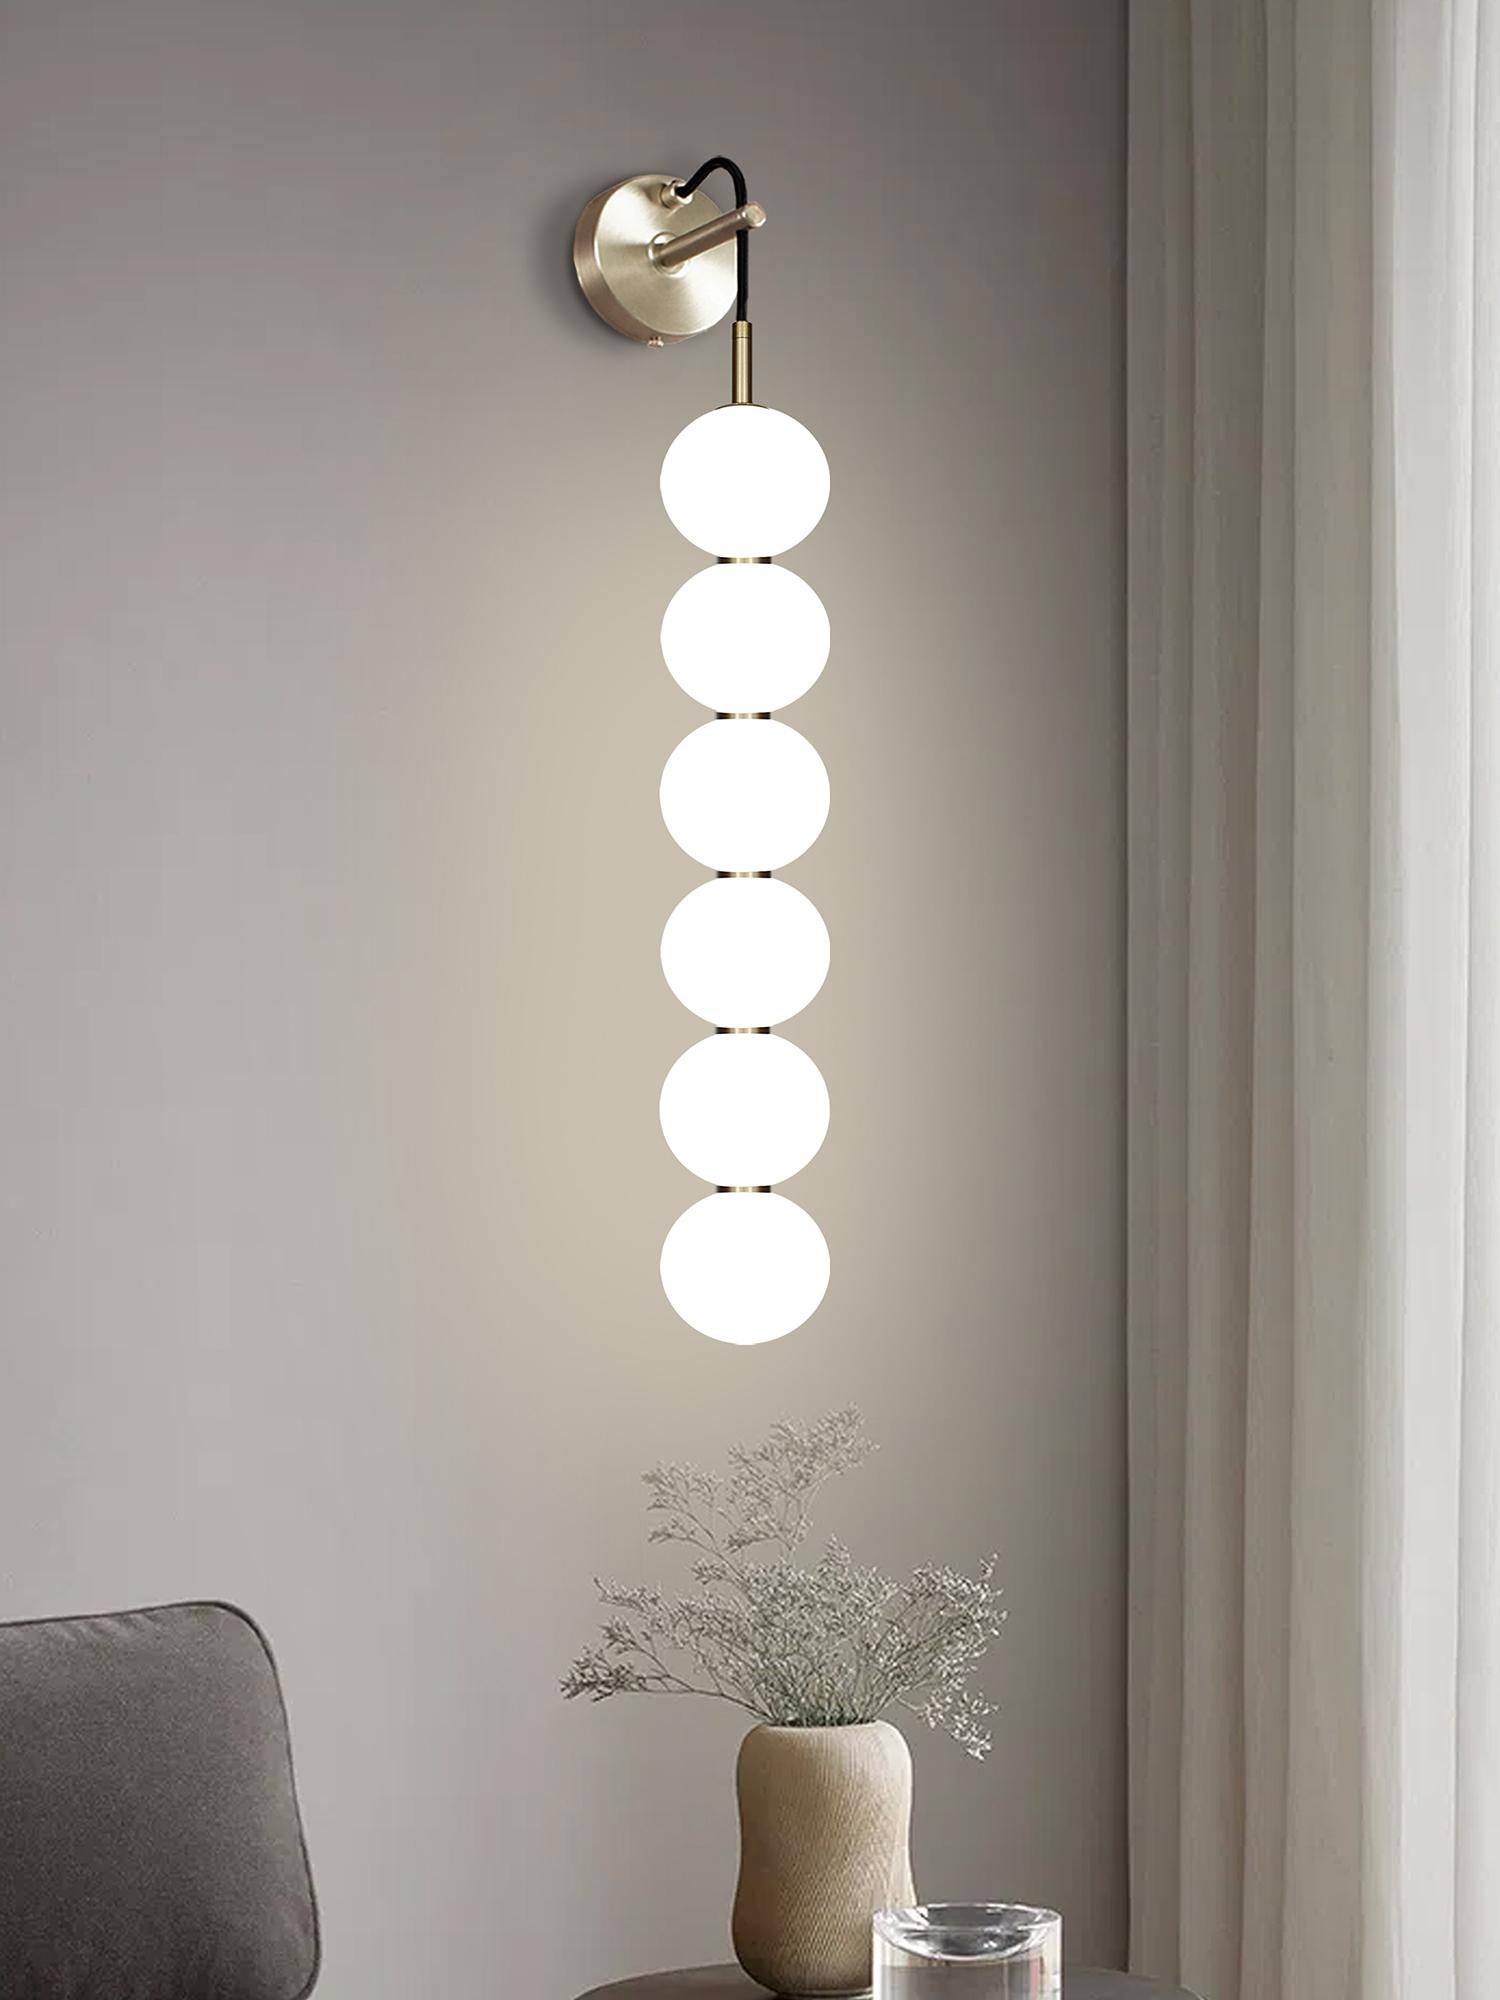 Delicate white opaline glass orbs stacked on top of one another to create an echoed glow of light and the illusion of subtle reflections.